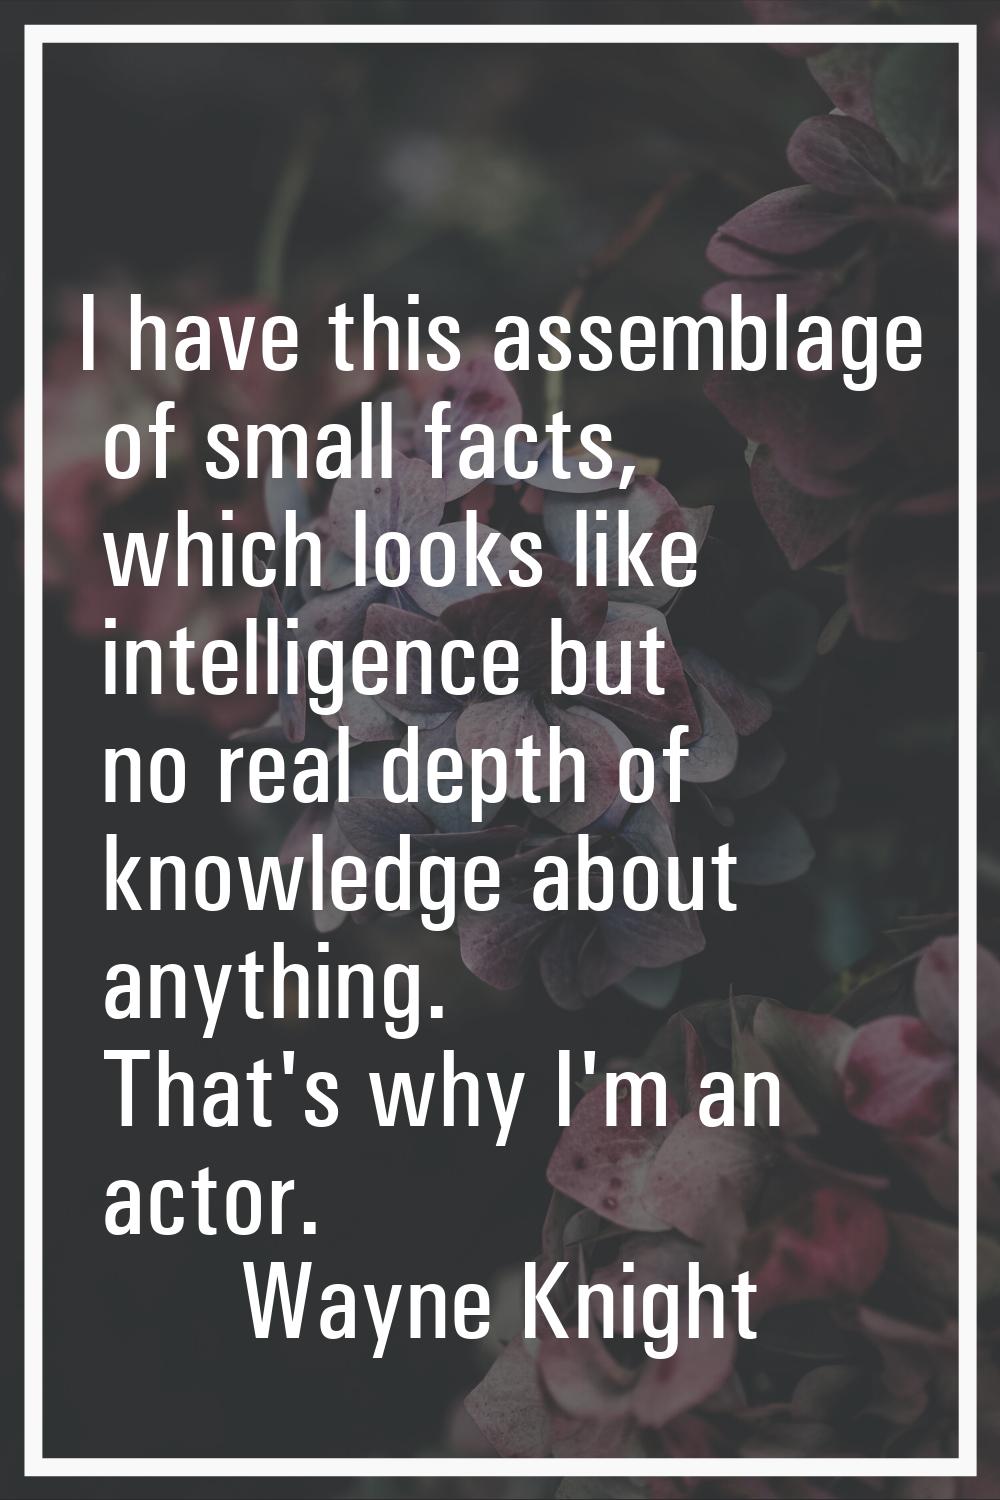 I have this assemblage of small facts, which looks like intelligence but no real depth of knowledge